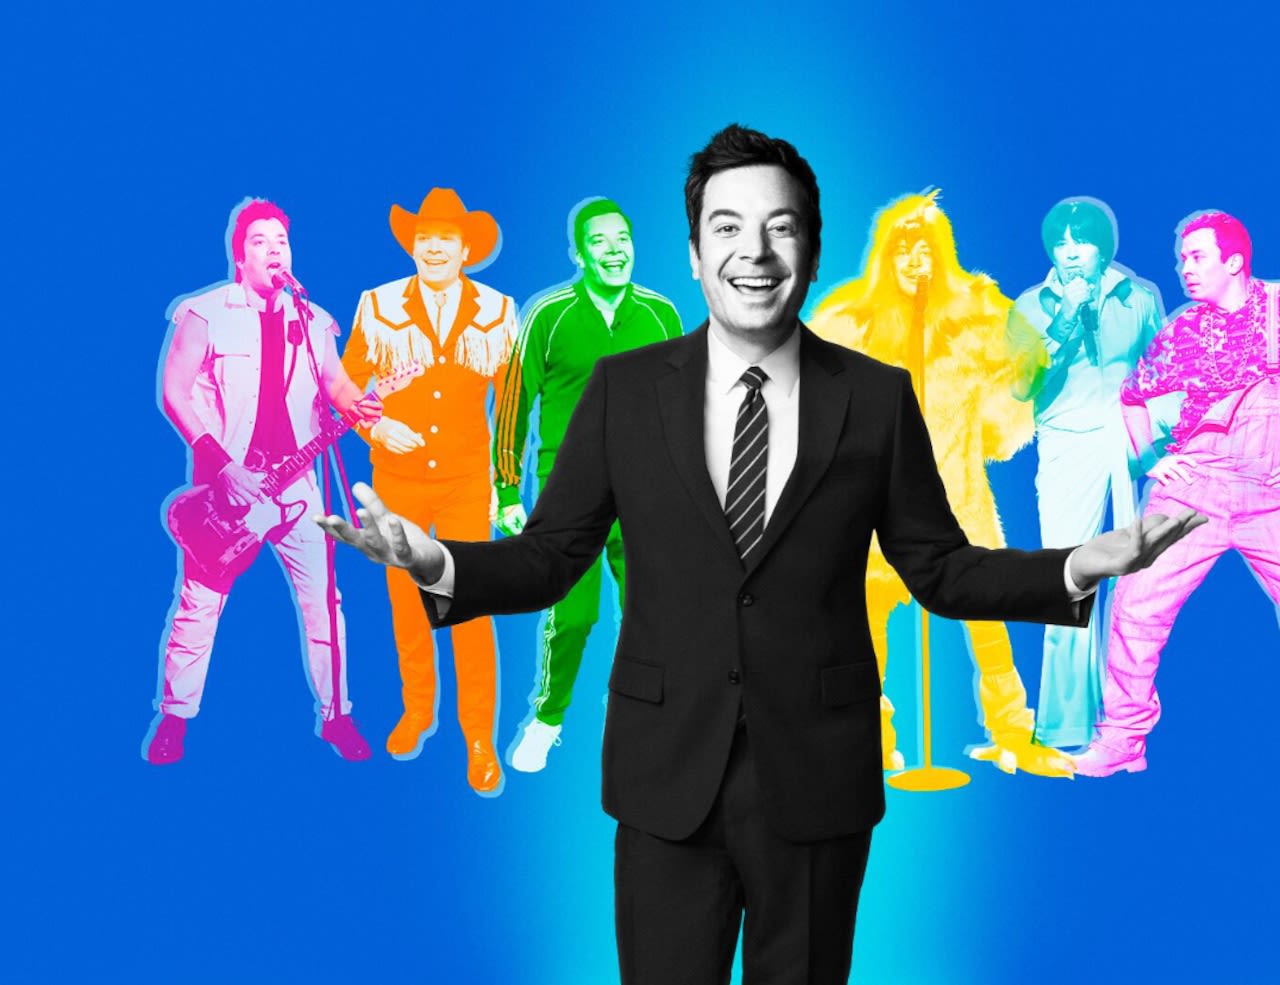 ‘The Tonight Show Starring Jimmy Fallon’ 10th anniversary special: Watch for free